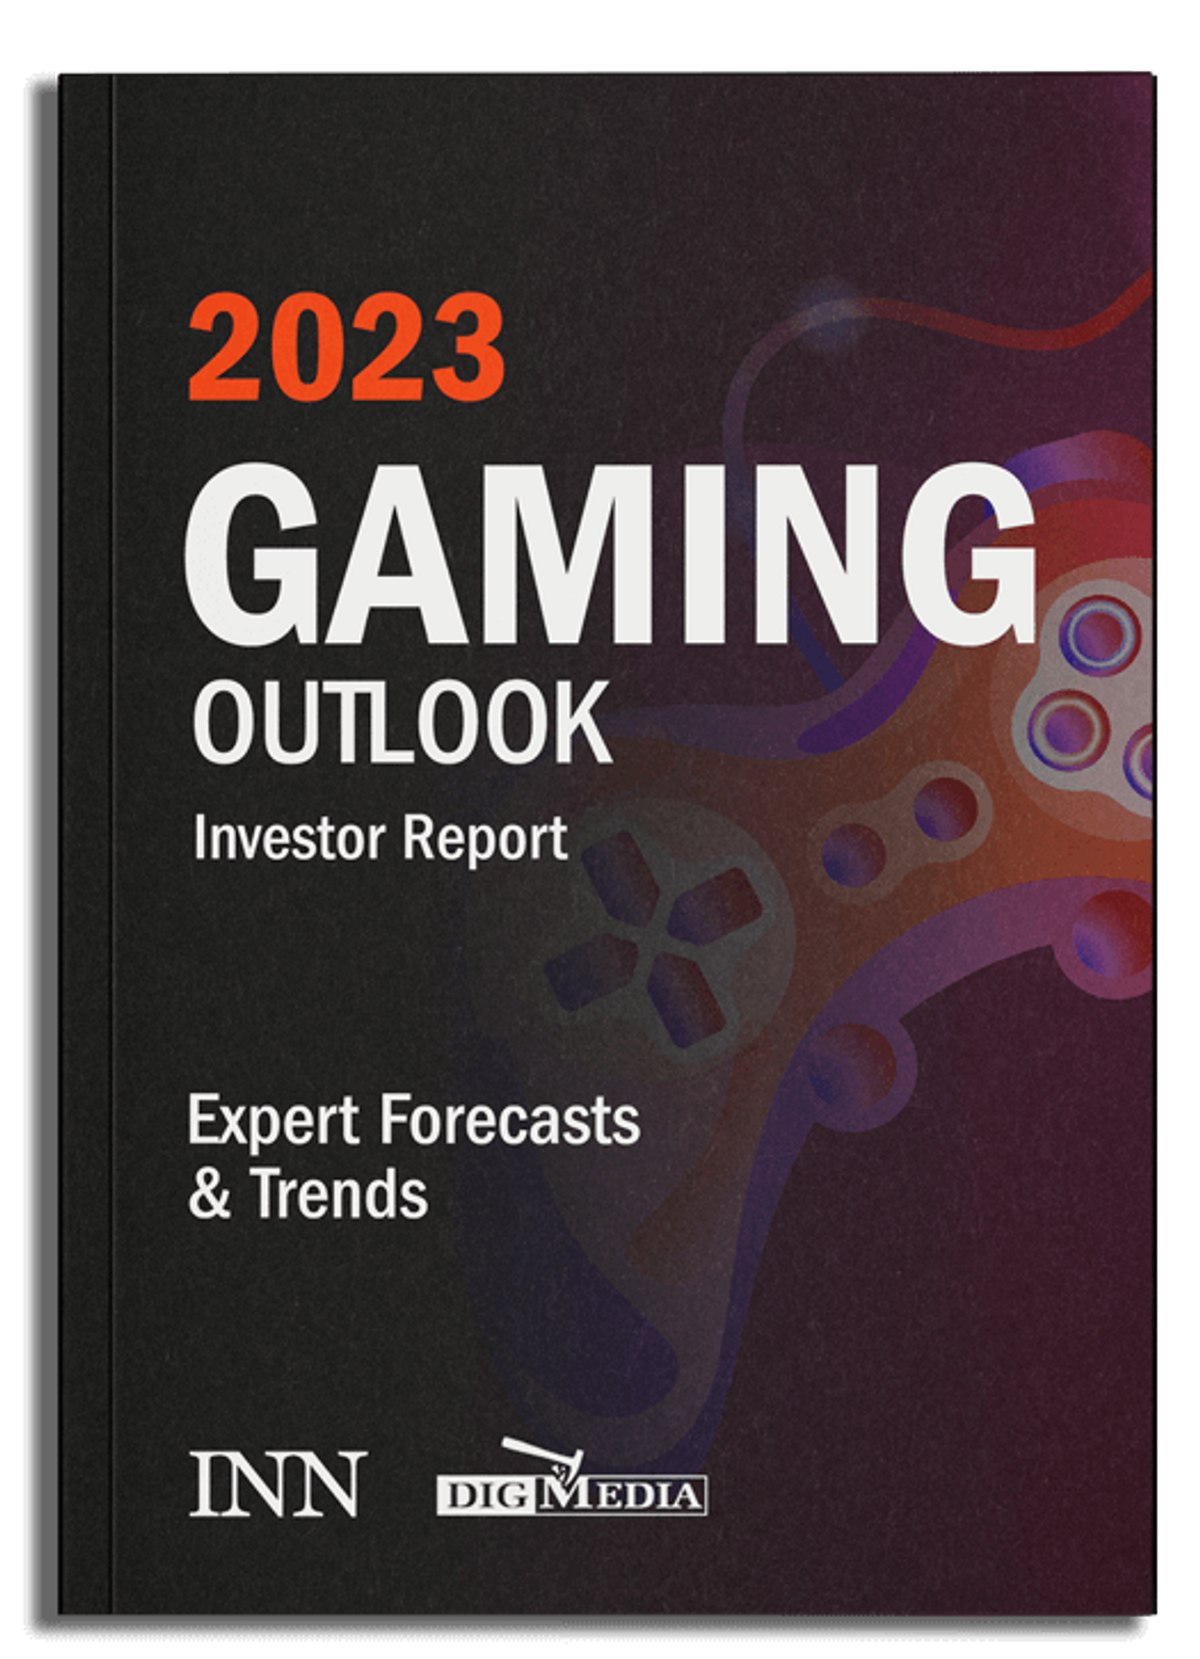 2023 Gaming Outlook Report.